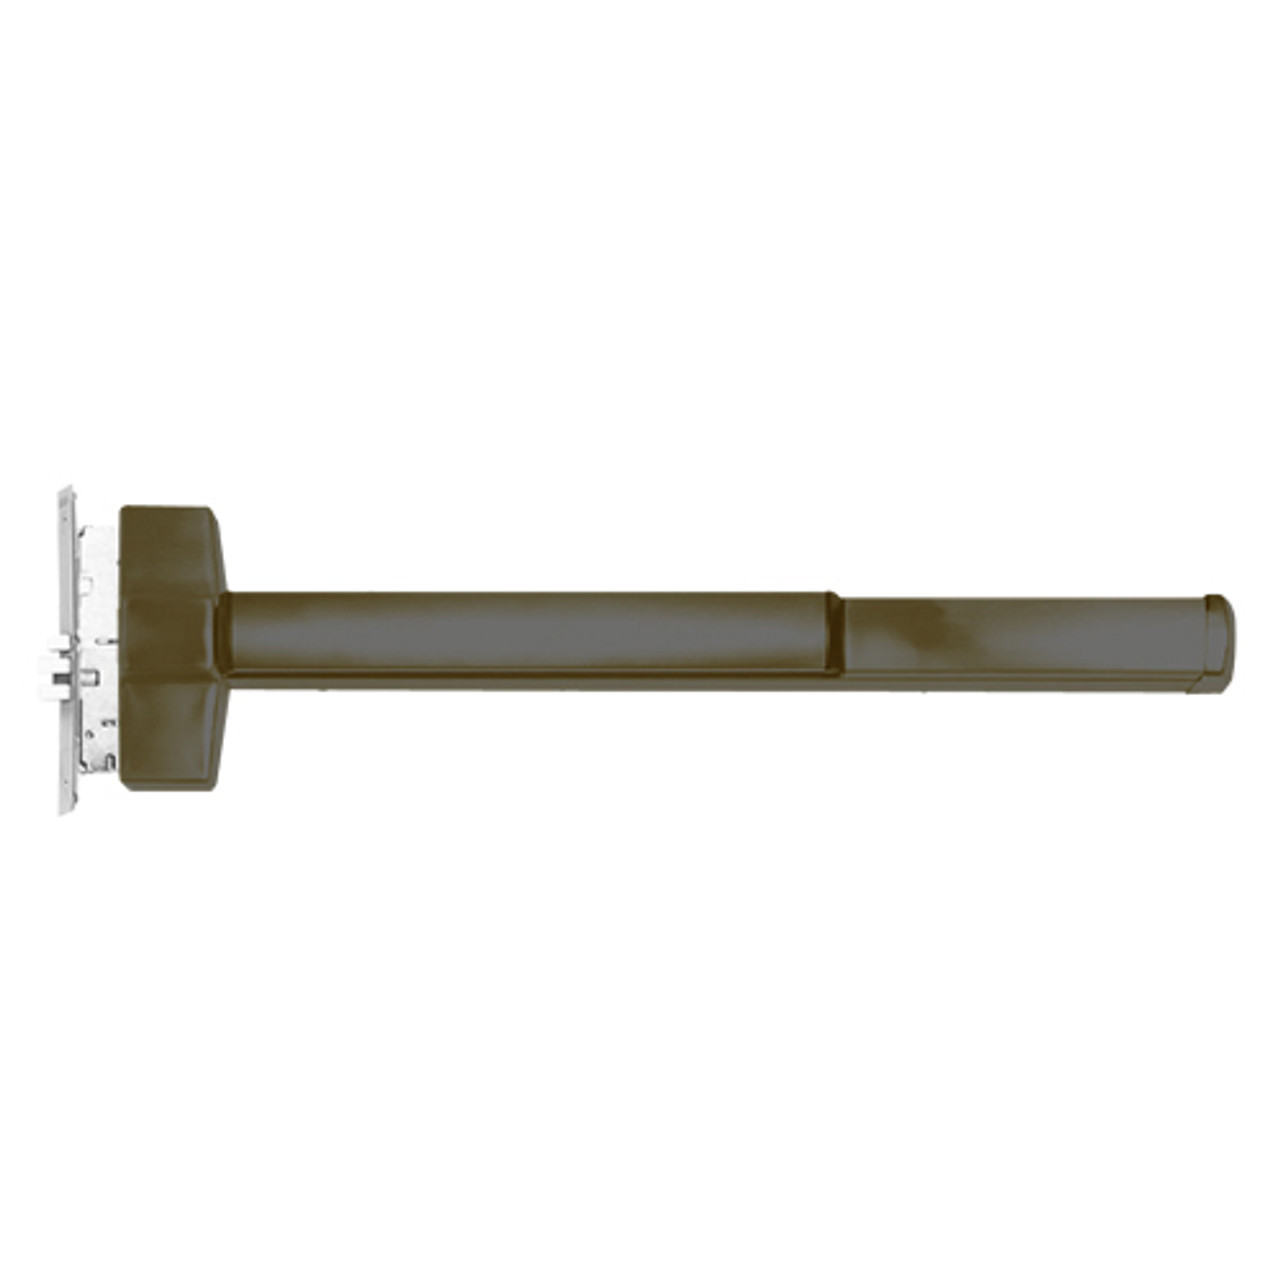 ED5657AT-613-RHR Corbin ED5600 Series Fire Rated Mortise Exit Device in Oil Rubbed Bronze Finish